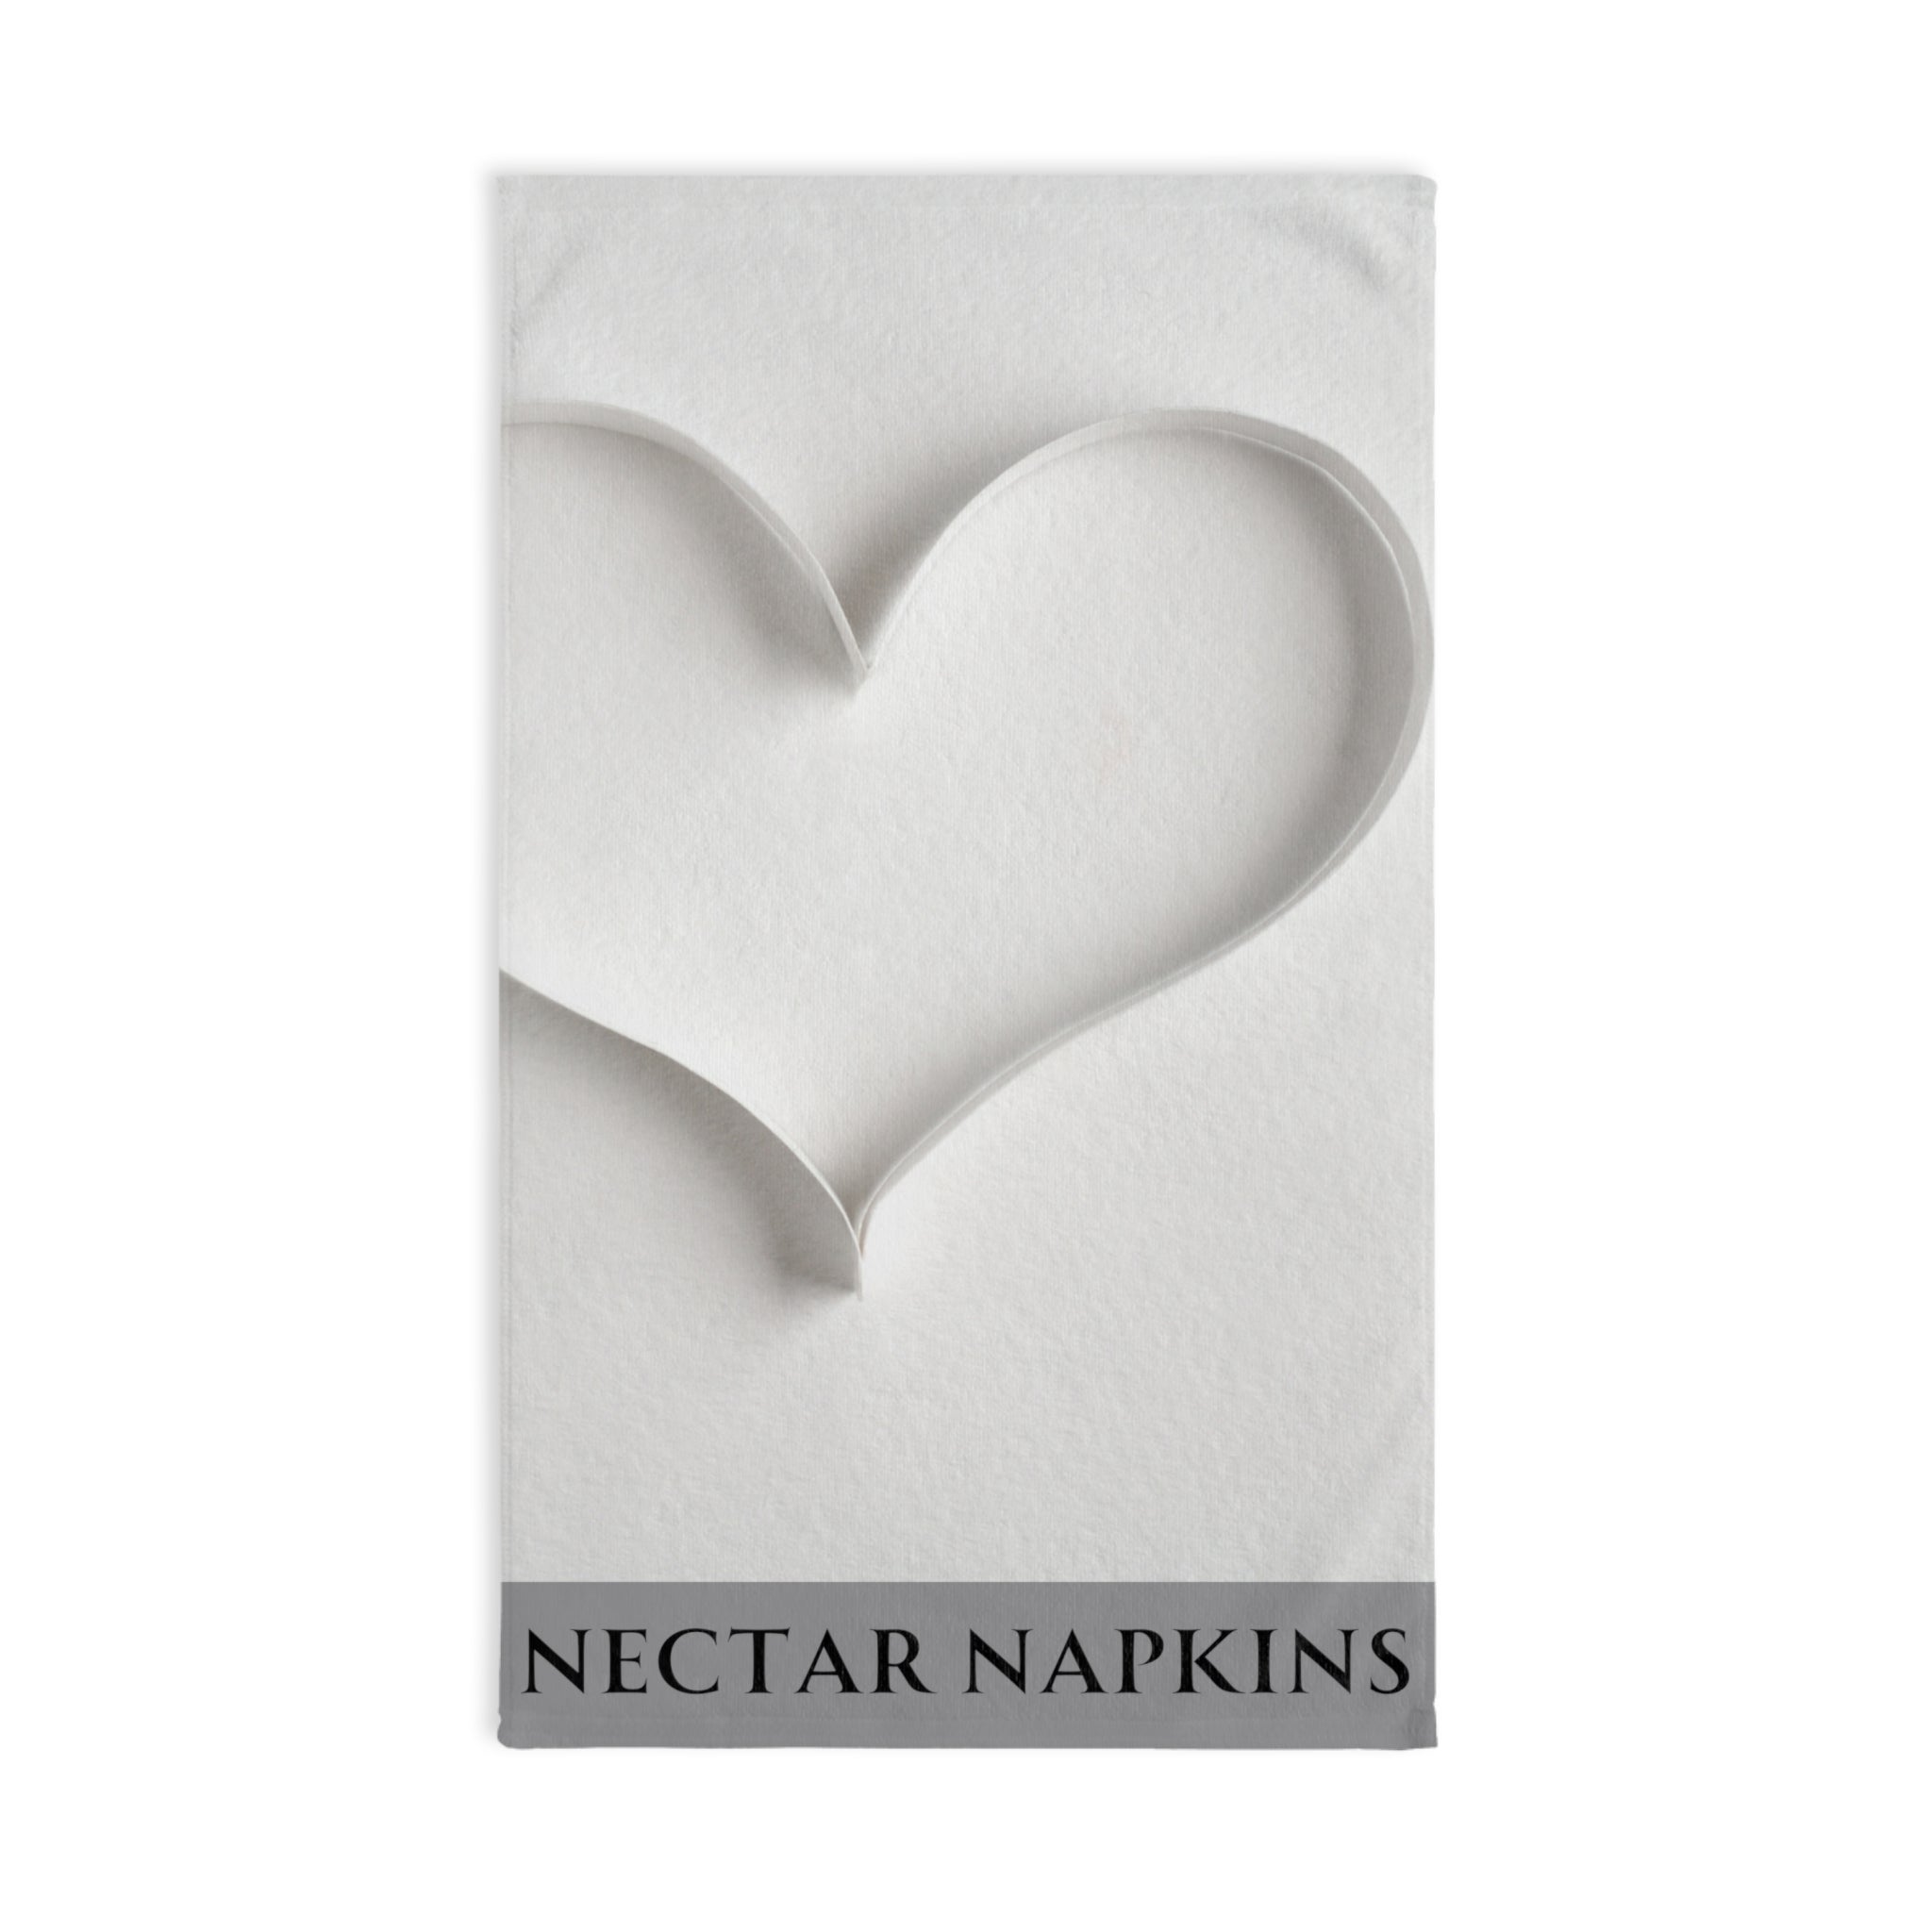 Paper Heart 3D Grey | Anniversary Wedding, Christmas, Valentines Day, Birthday Gifts for Him, Her, Romantic Gifts for Wife, Girlfriend, Couples Gifts for Boyfriend, Husband NECTAR NAPKINS